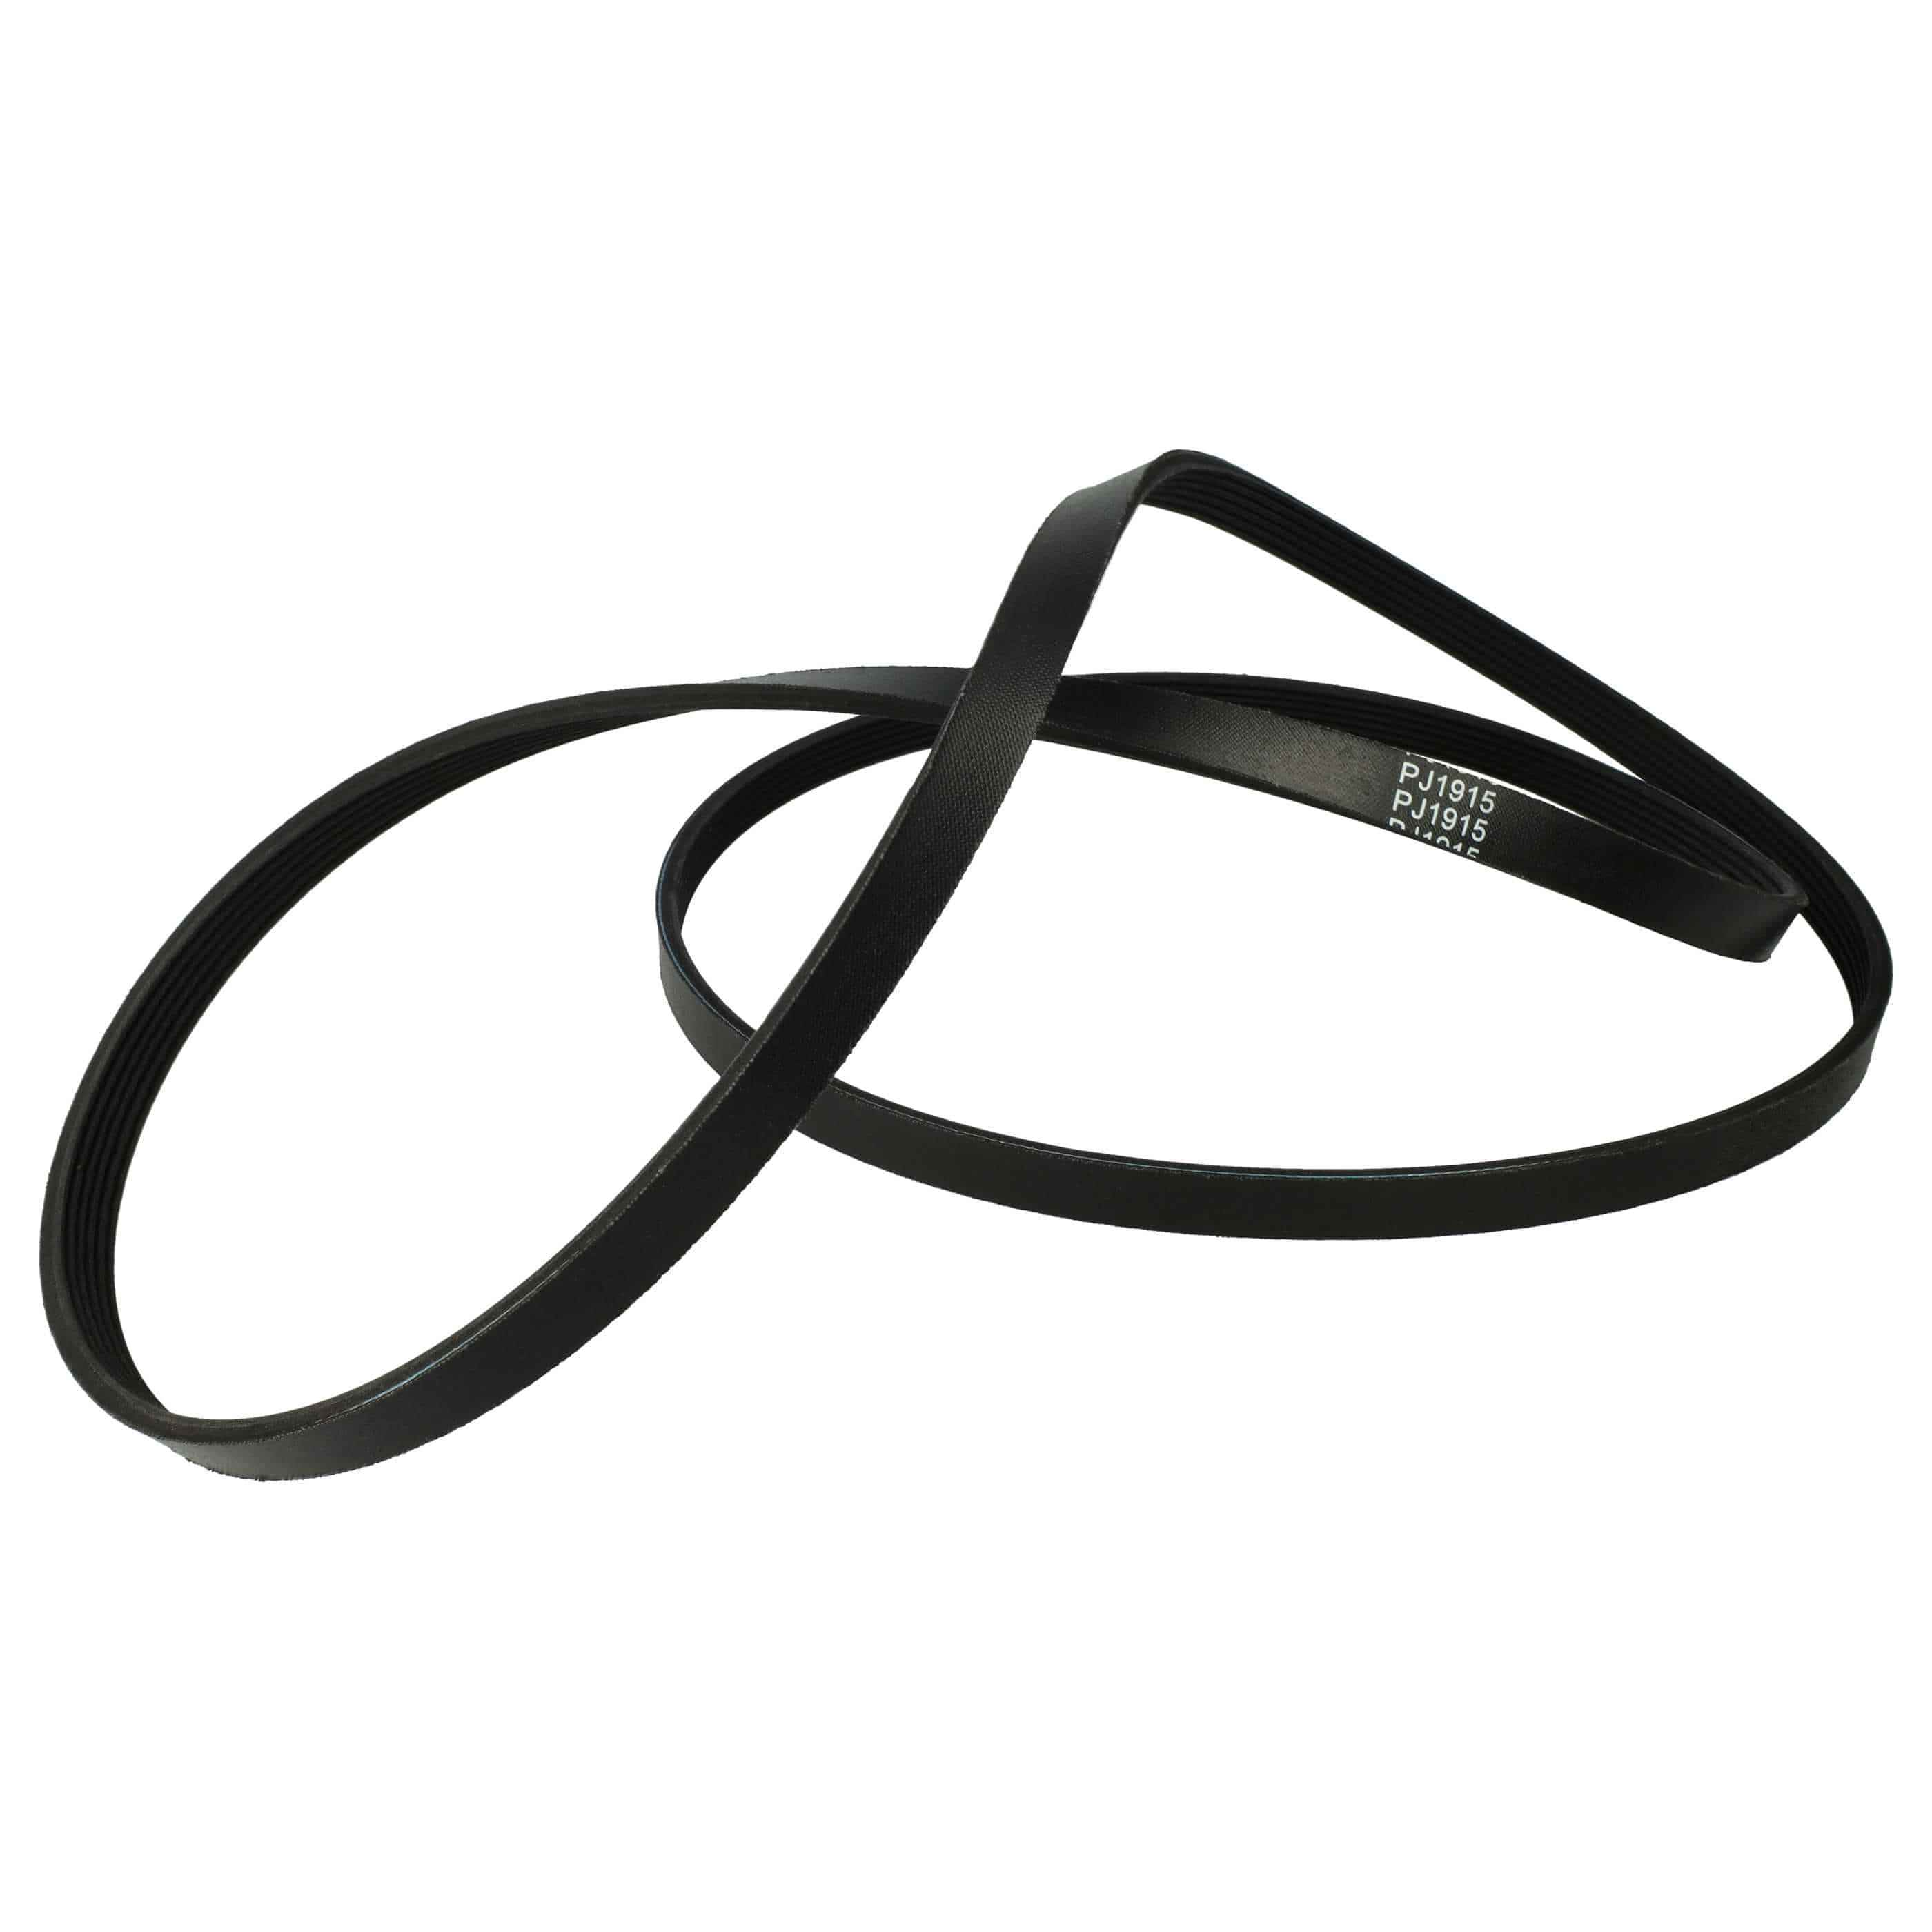 Drive Belt replaces Miele 5017140 for Miele Tumble Dryer - 191.5cm